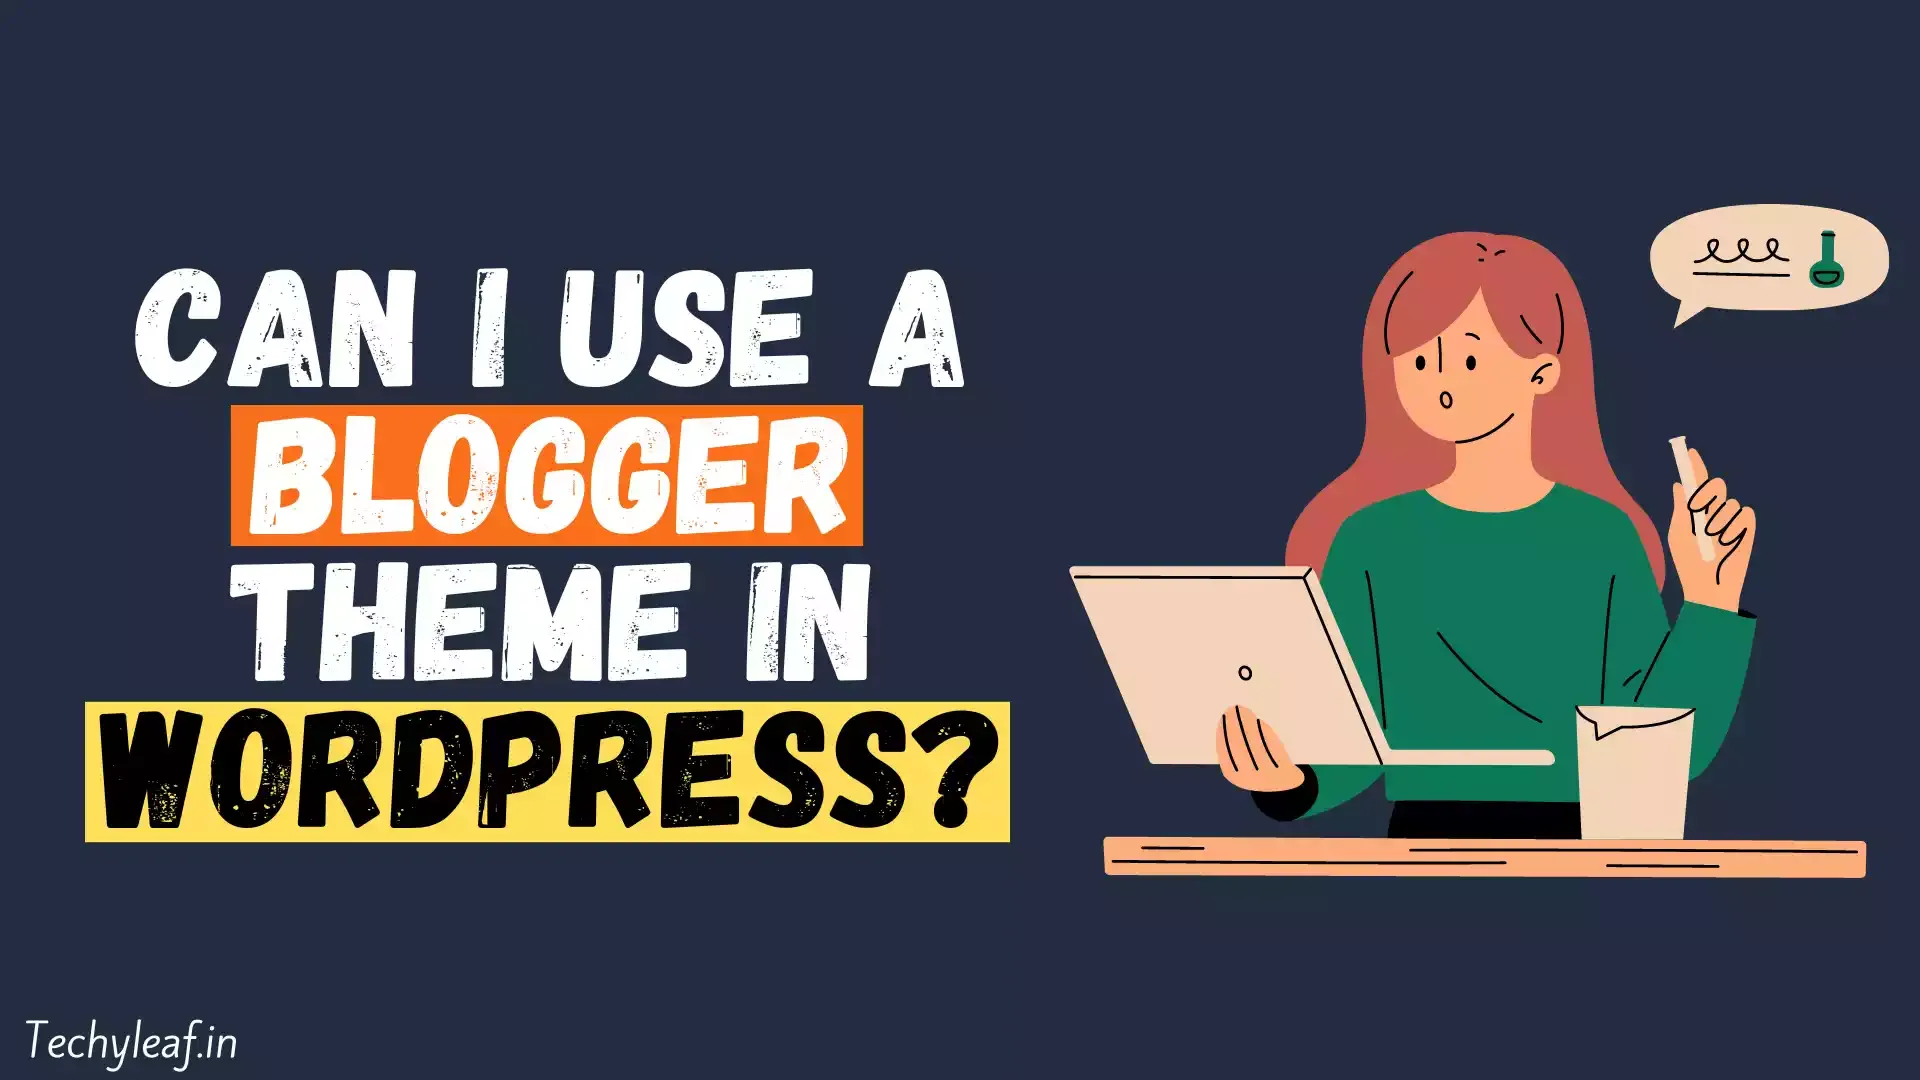 Can I use a Blogger theme in WordPress?